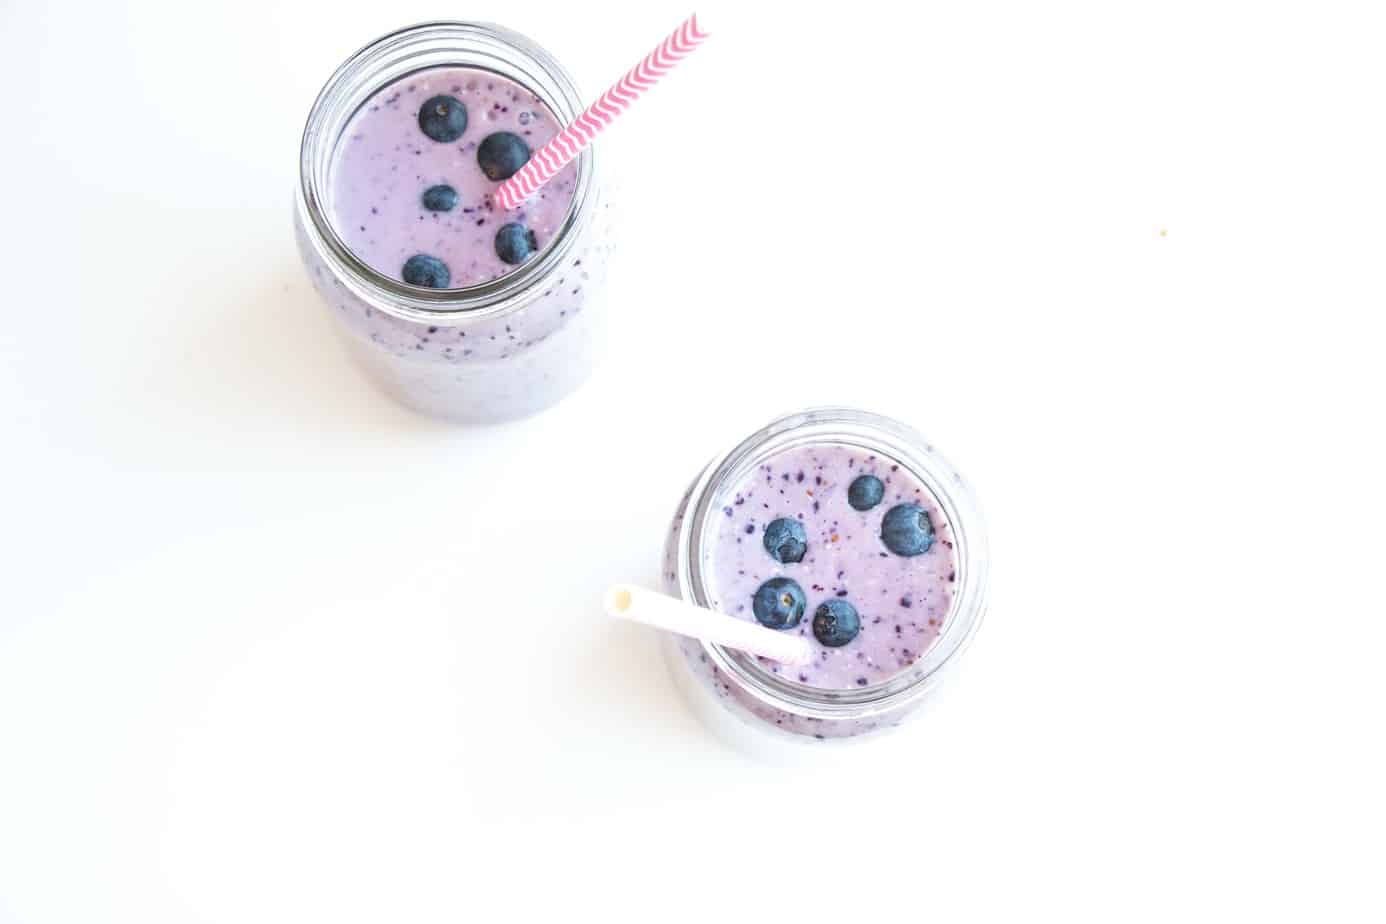 Healthy Blueberry Oat Milk Smoothie from above garnished with fresh blueberries.